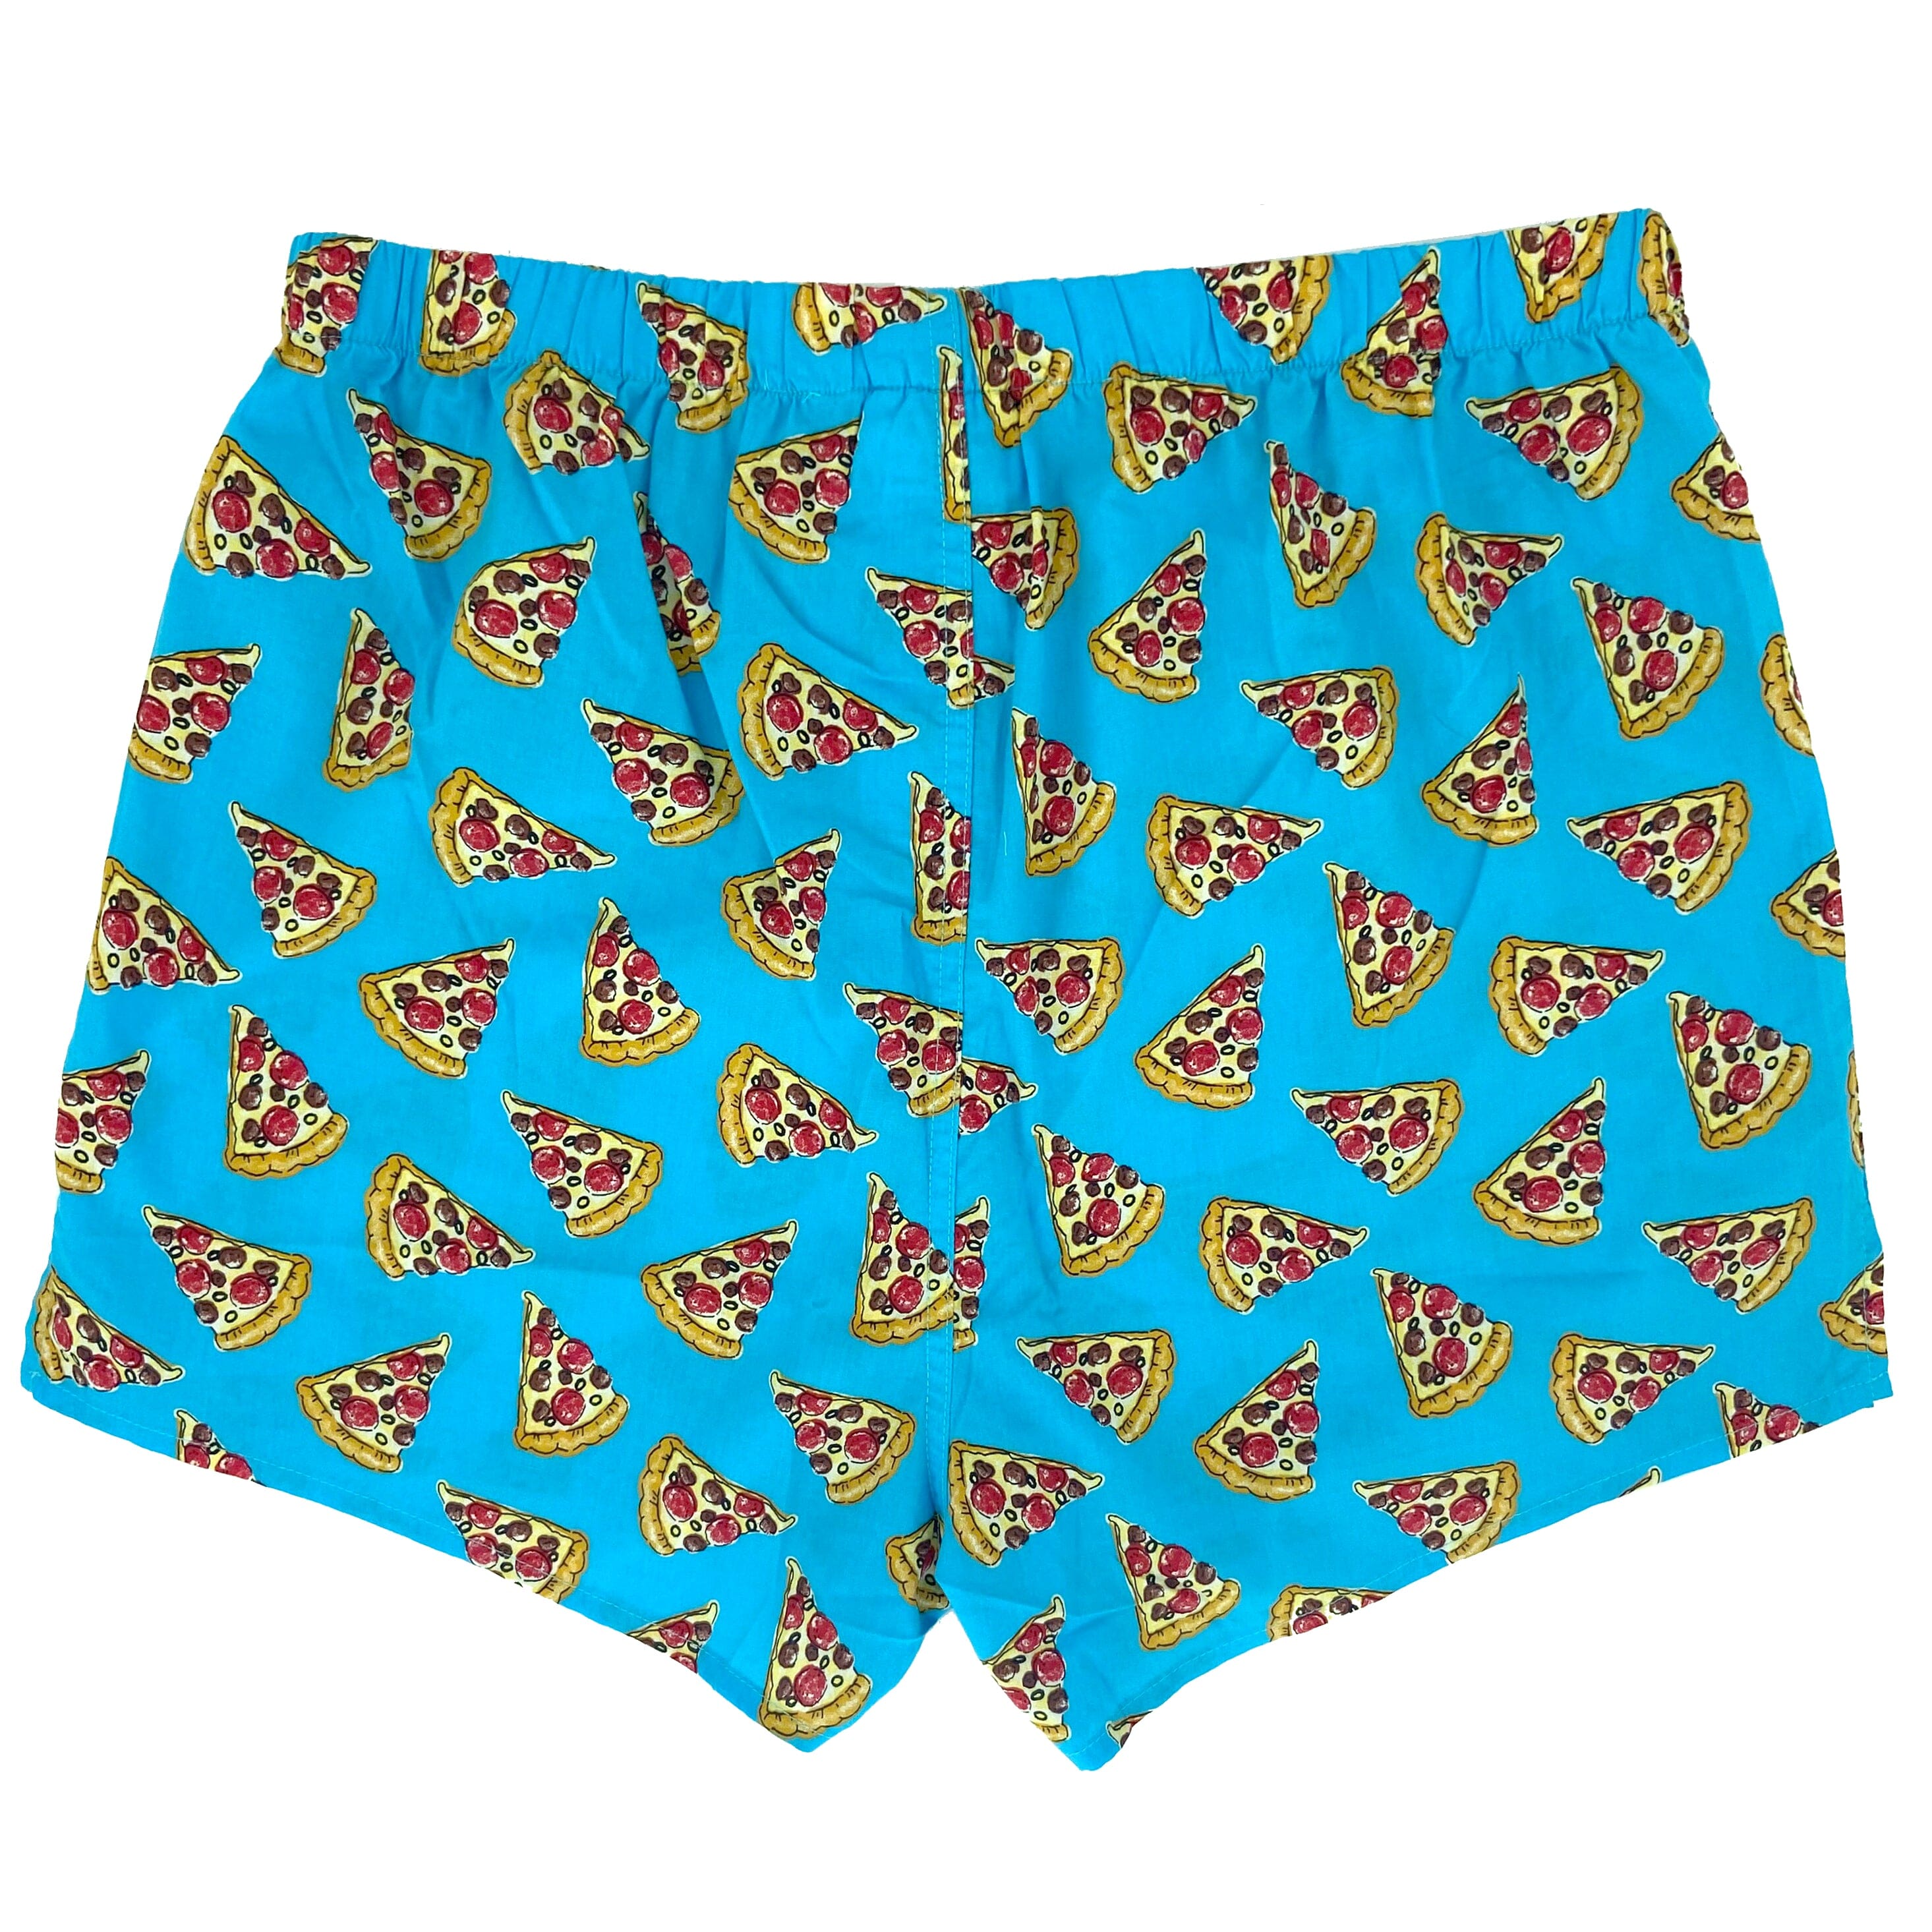 Buy Men's Cheesy Pepperoni Pizza Patterned Cotton Boxer Shorts Online